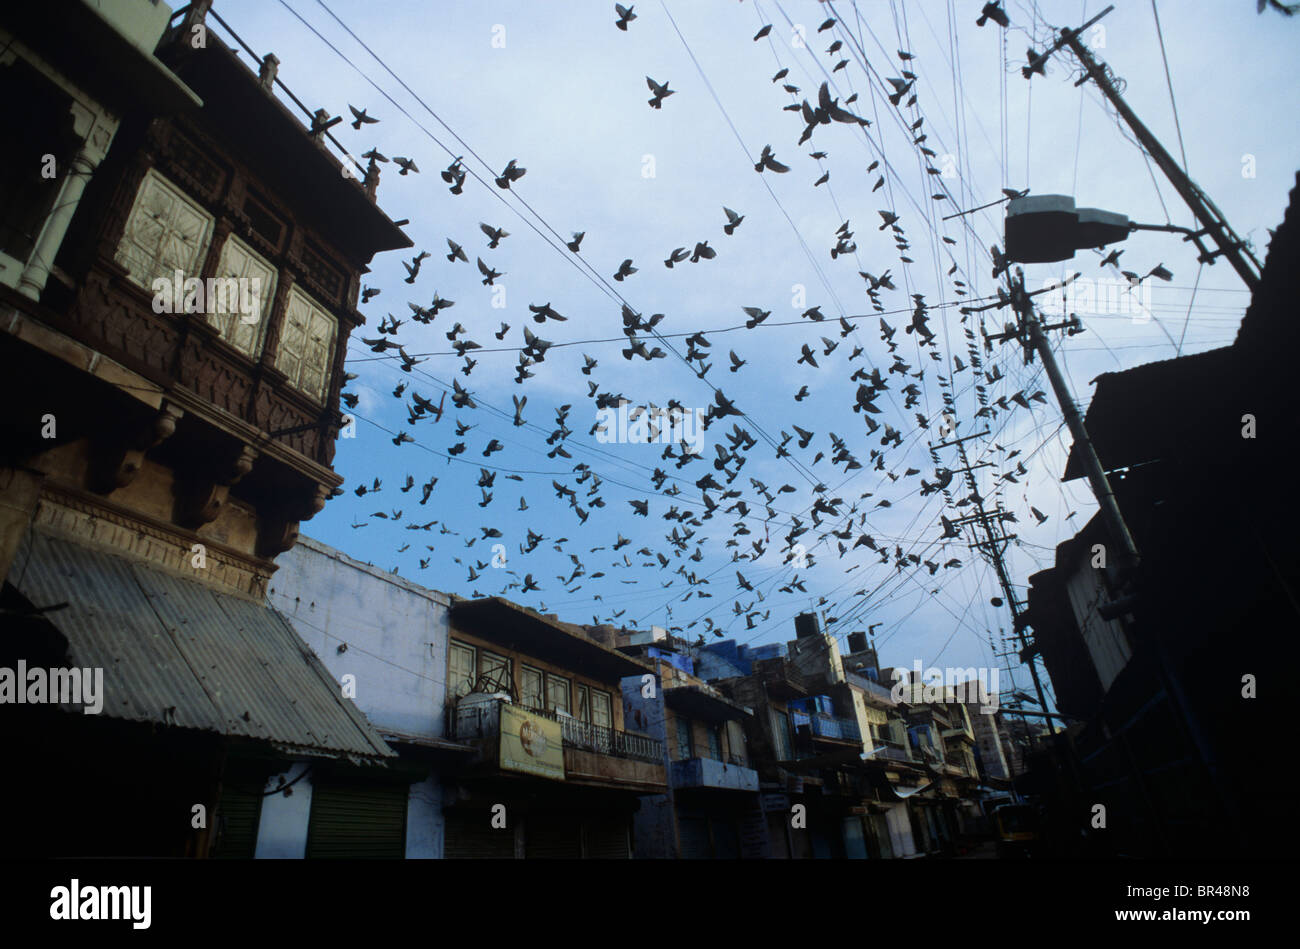 a-flock-of-pigeons-over-a-city-street-in-india-BR48N8.jpg